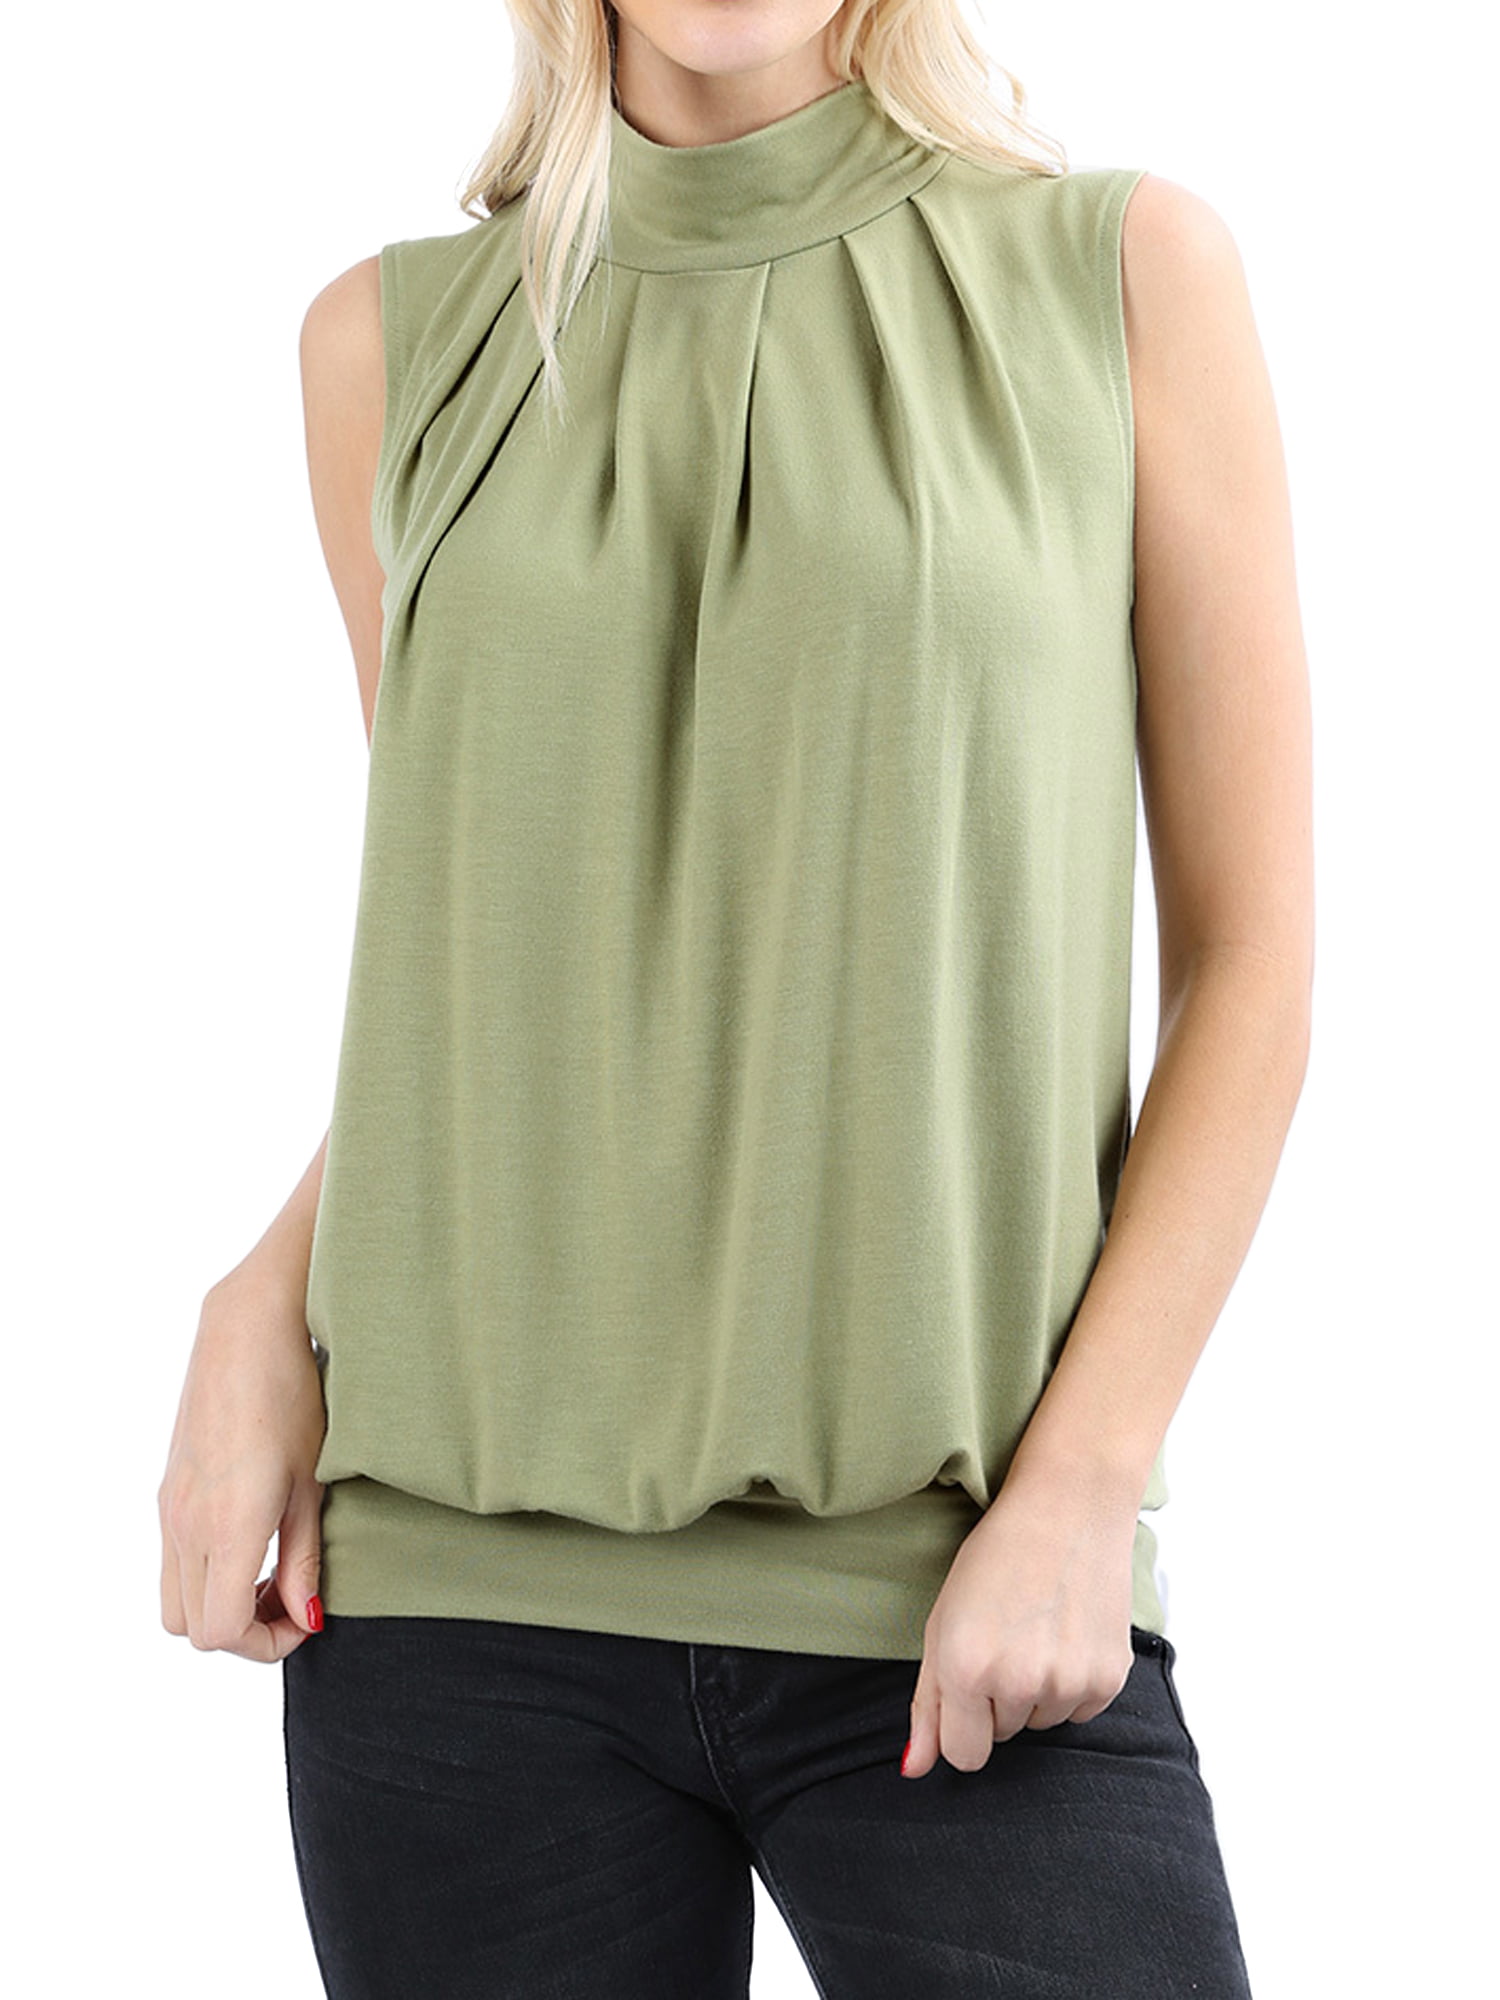 TheLovely - Women Sleeveless Mock-TurtleNeck Pleated Top with Waistband ...